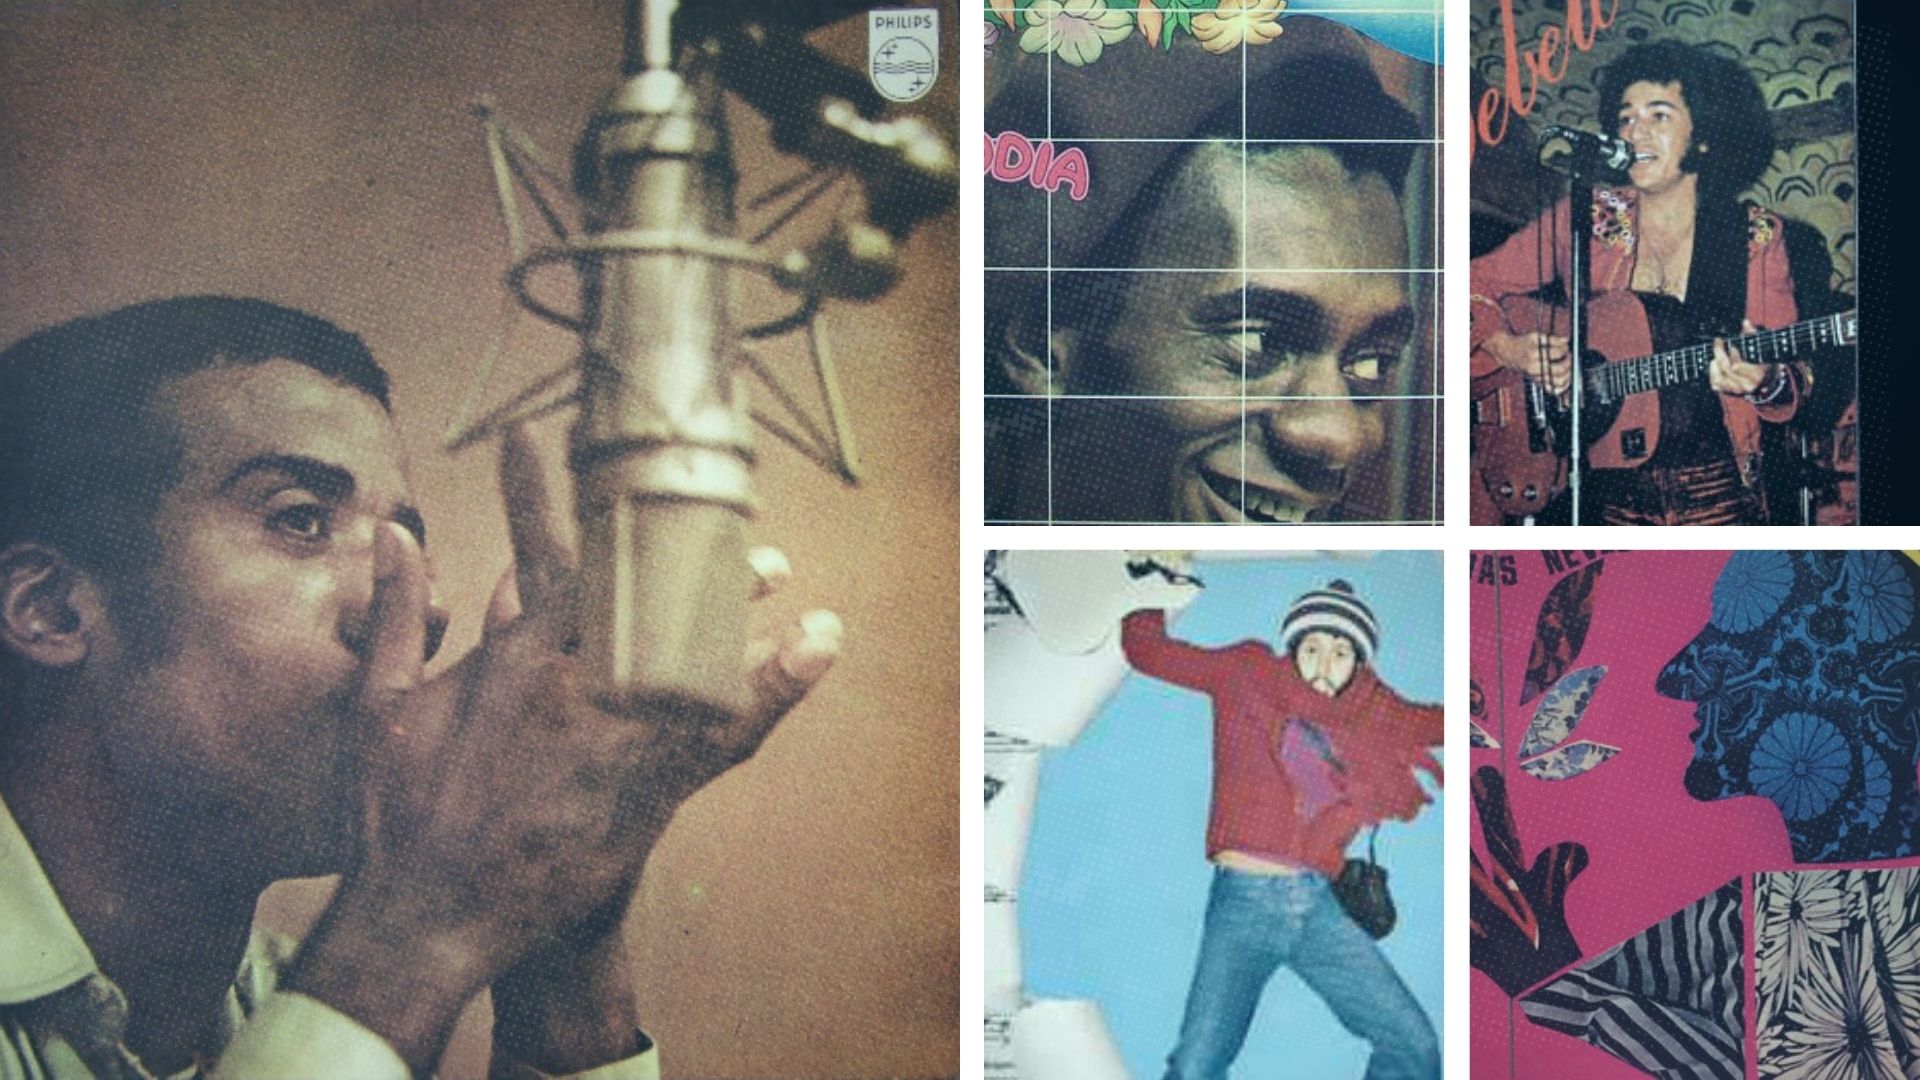 If You Like Fôrça Bruta by Jorge Ben, Listen to These 4 Albums